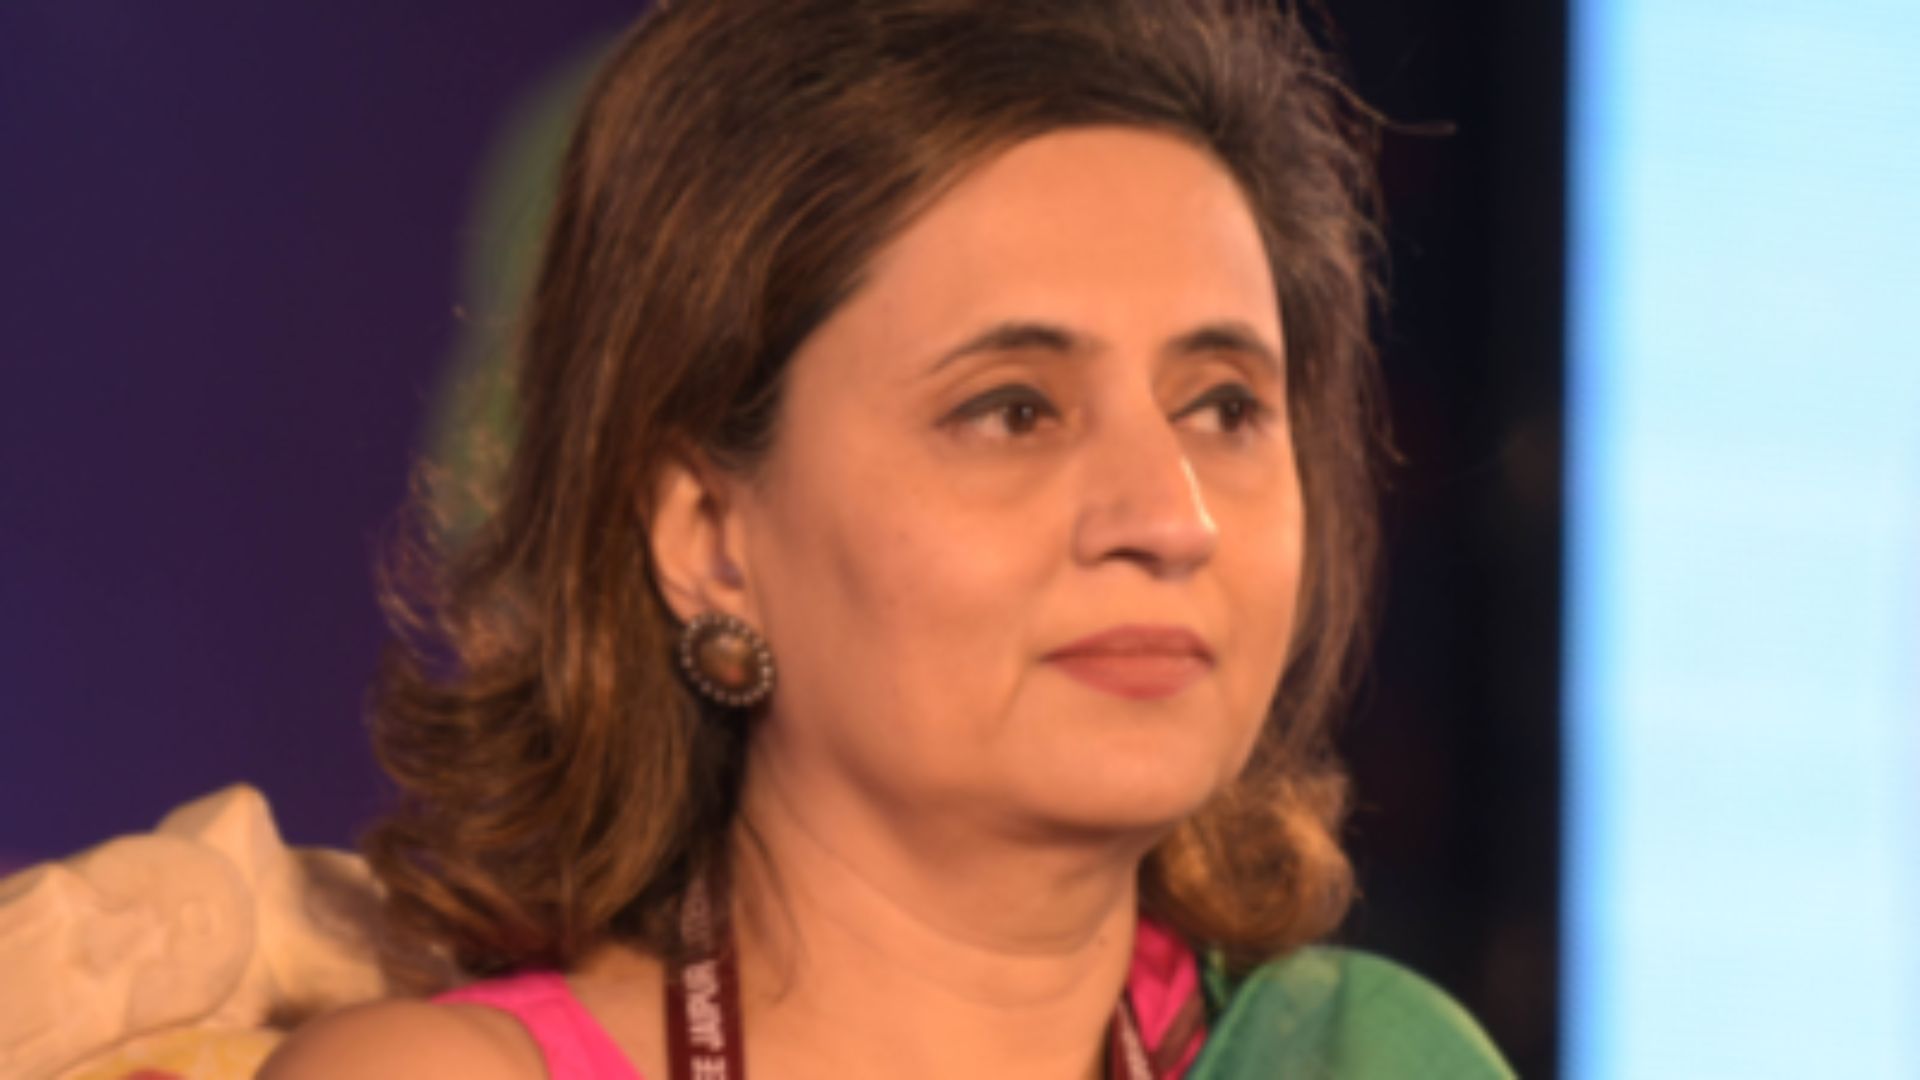 “These elections are moment of truth for us”: TMC’s Sagarika Ghose on Lok Sabha polls